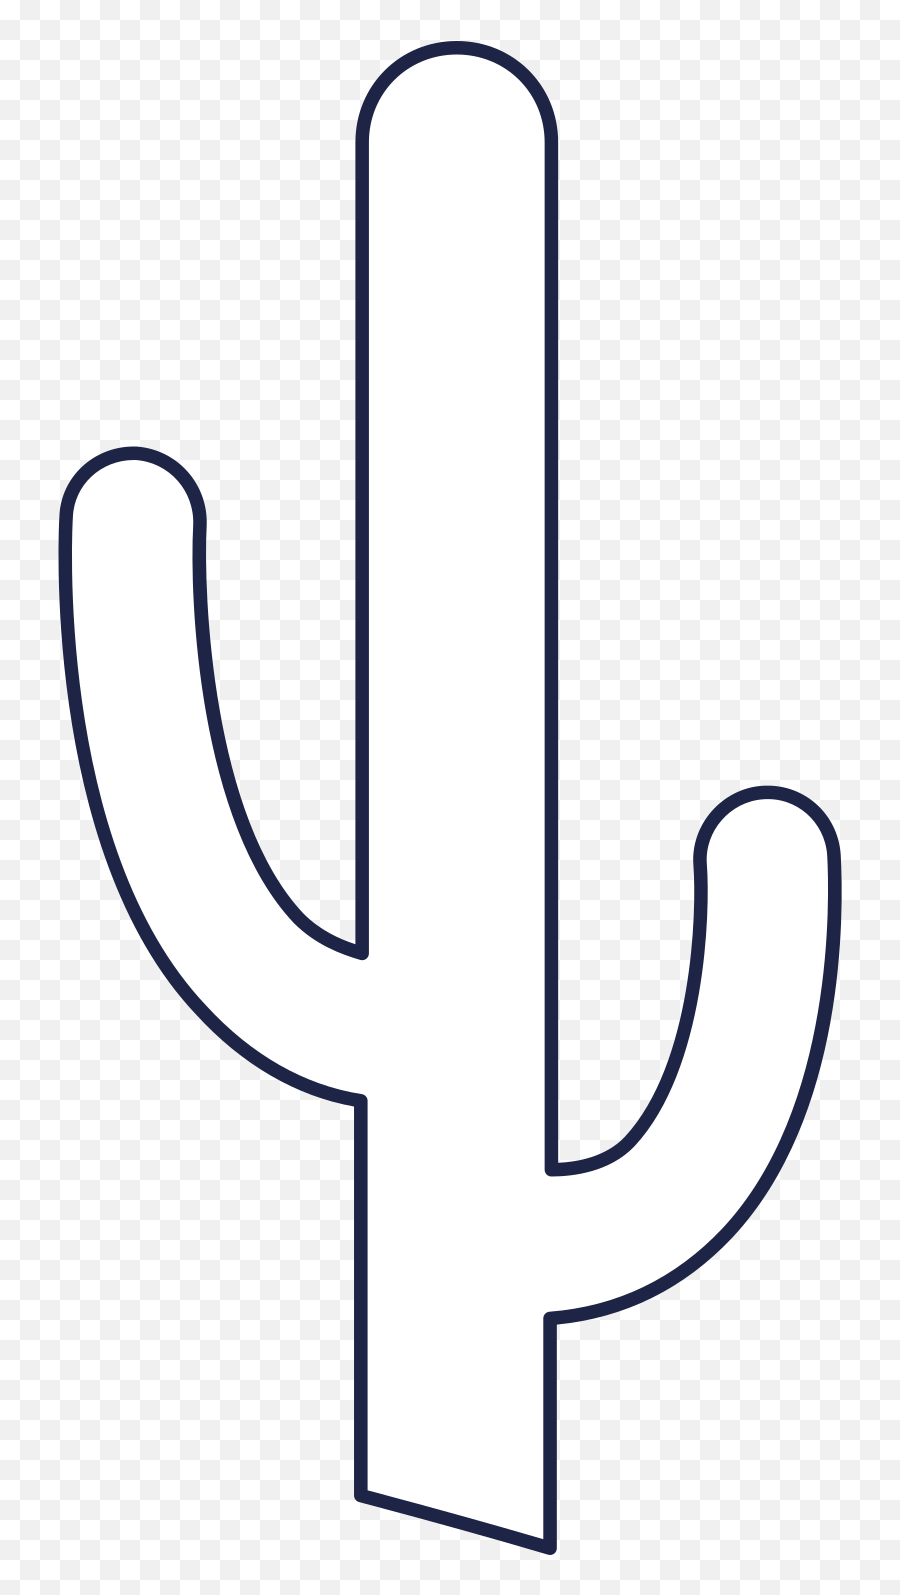 Style Cactus 2 Line Images In Png And Svg Icons8 Illustrations - Dot,Icon 1540